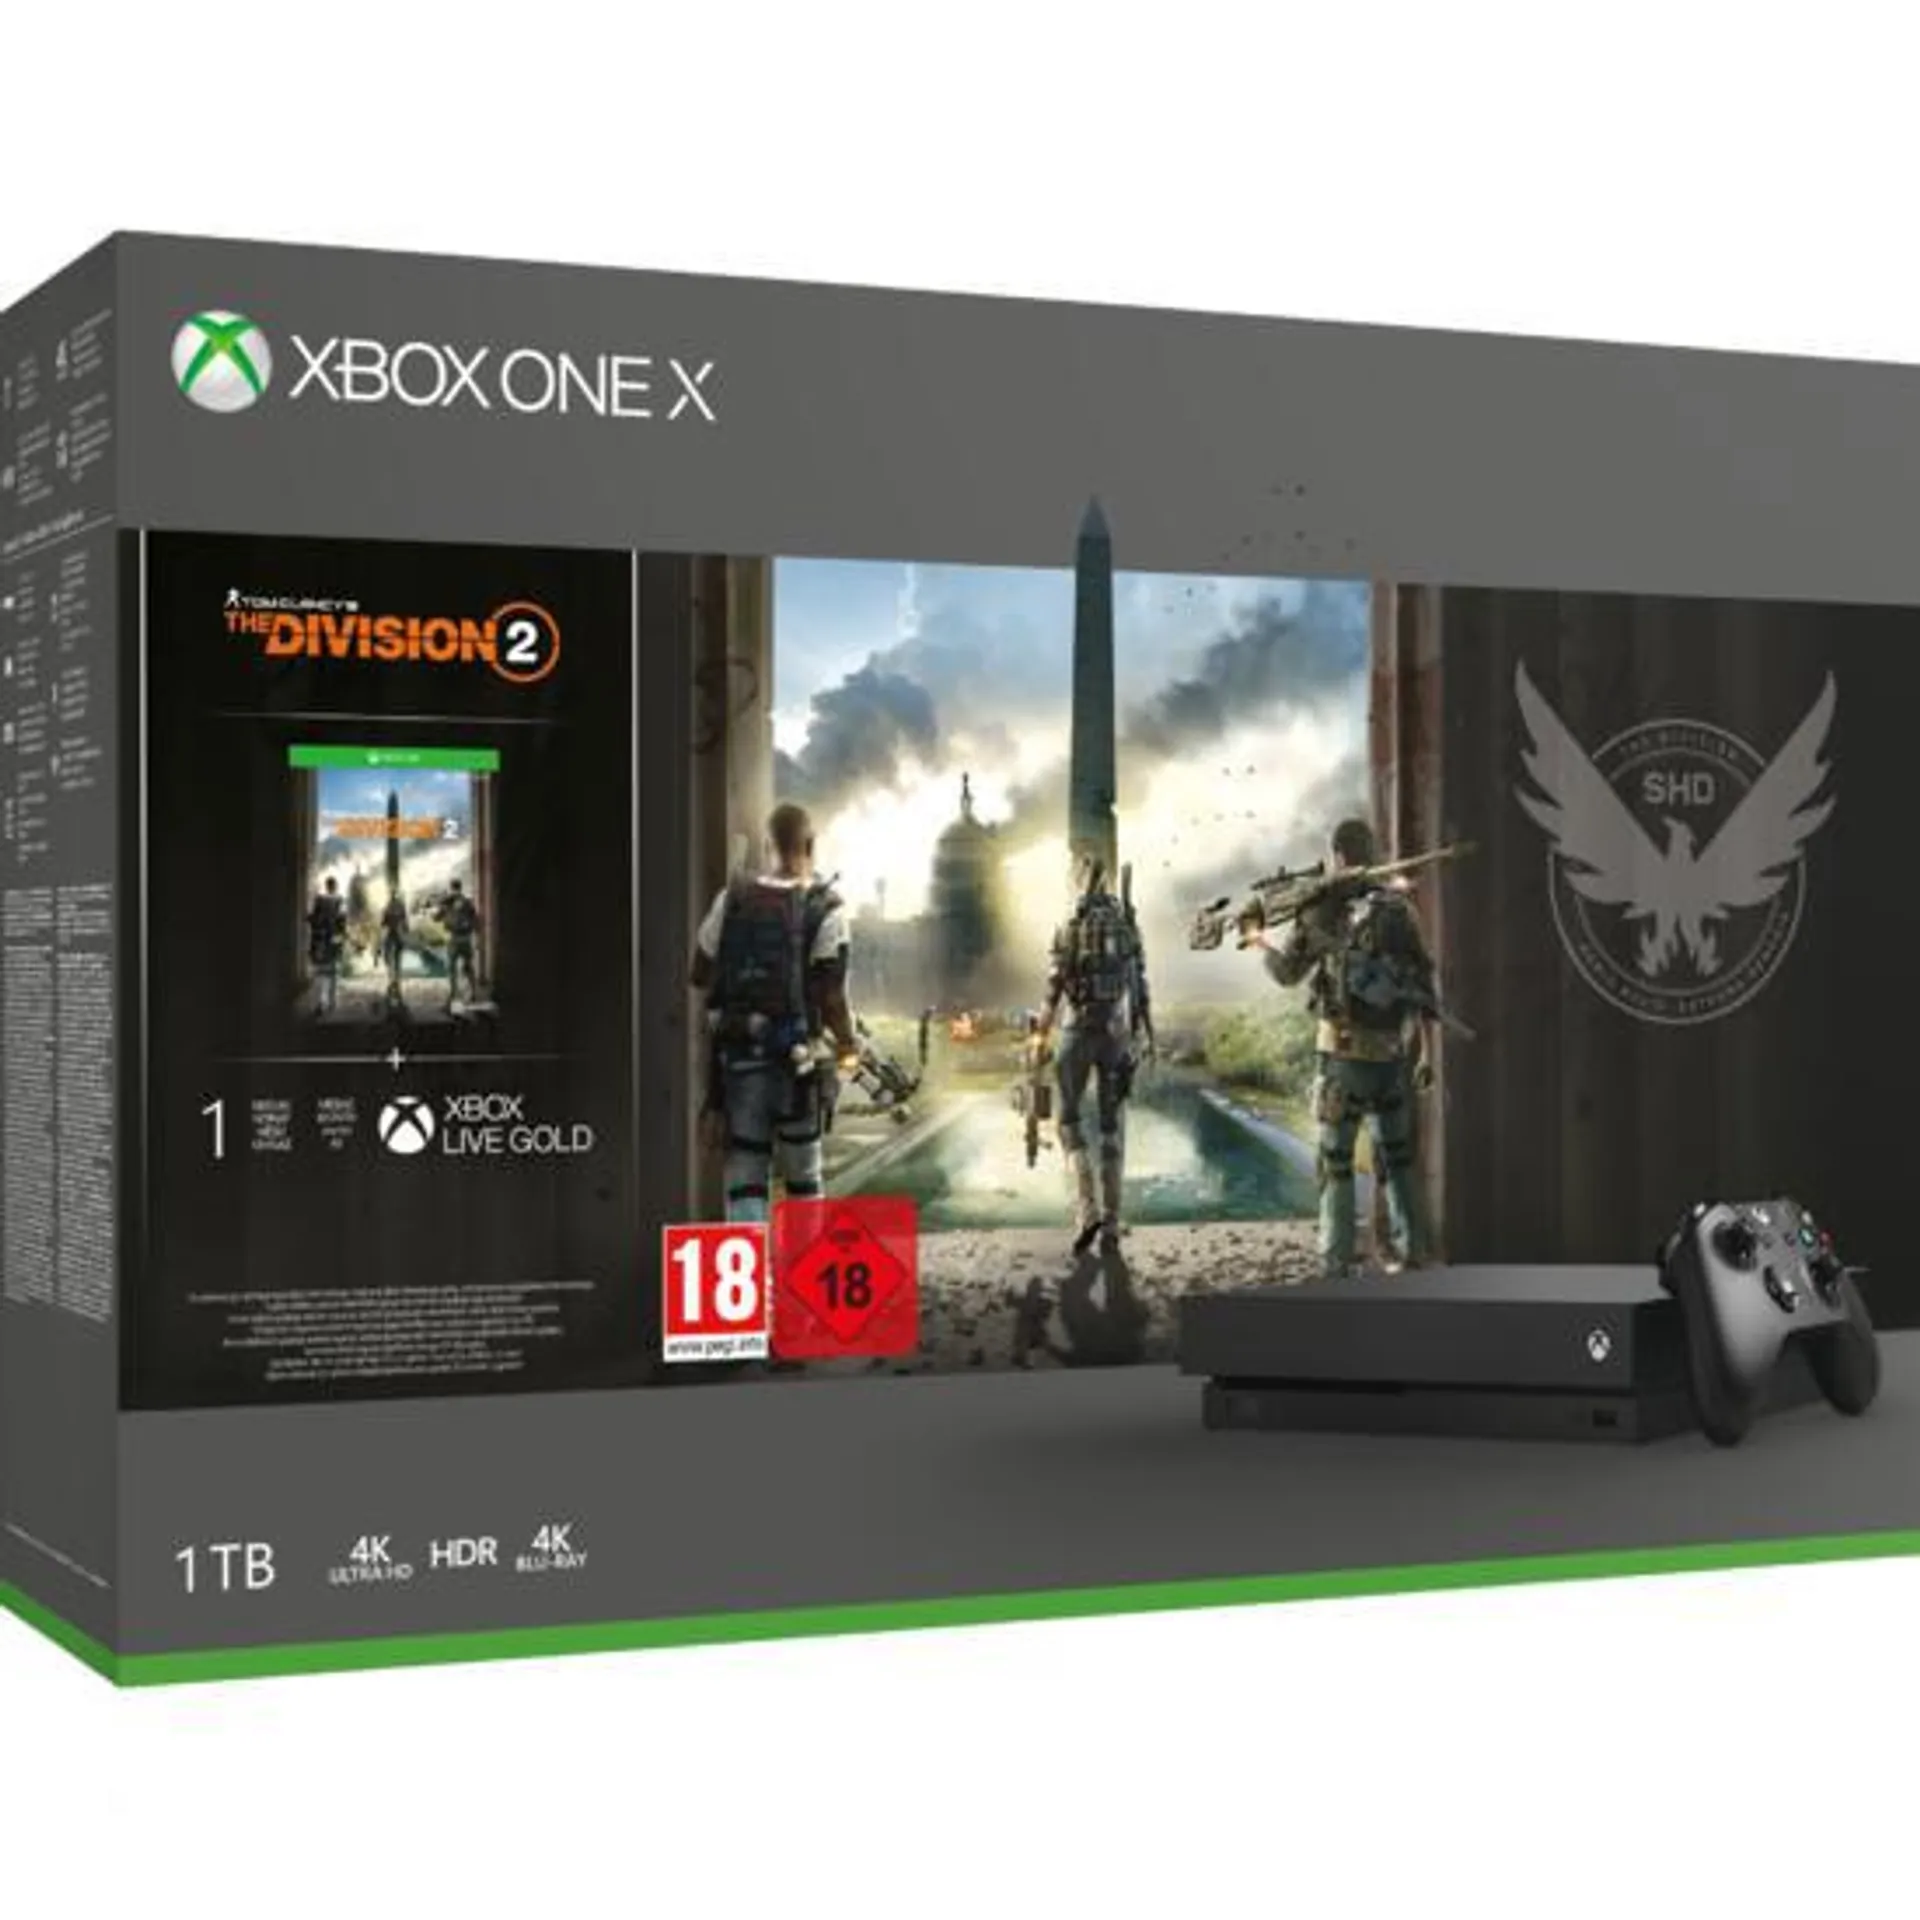 Xbox One X Konsole 1TB inkl. Tom Clancy's: The Division 2